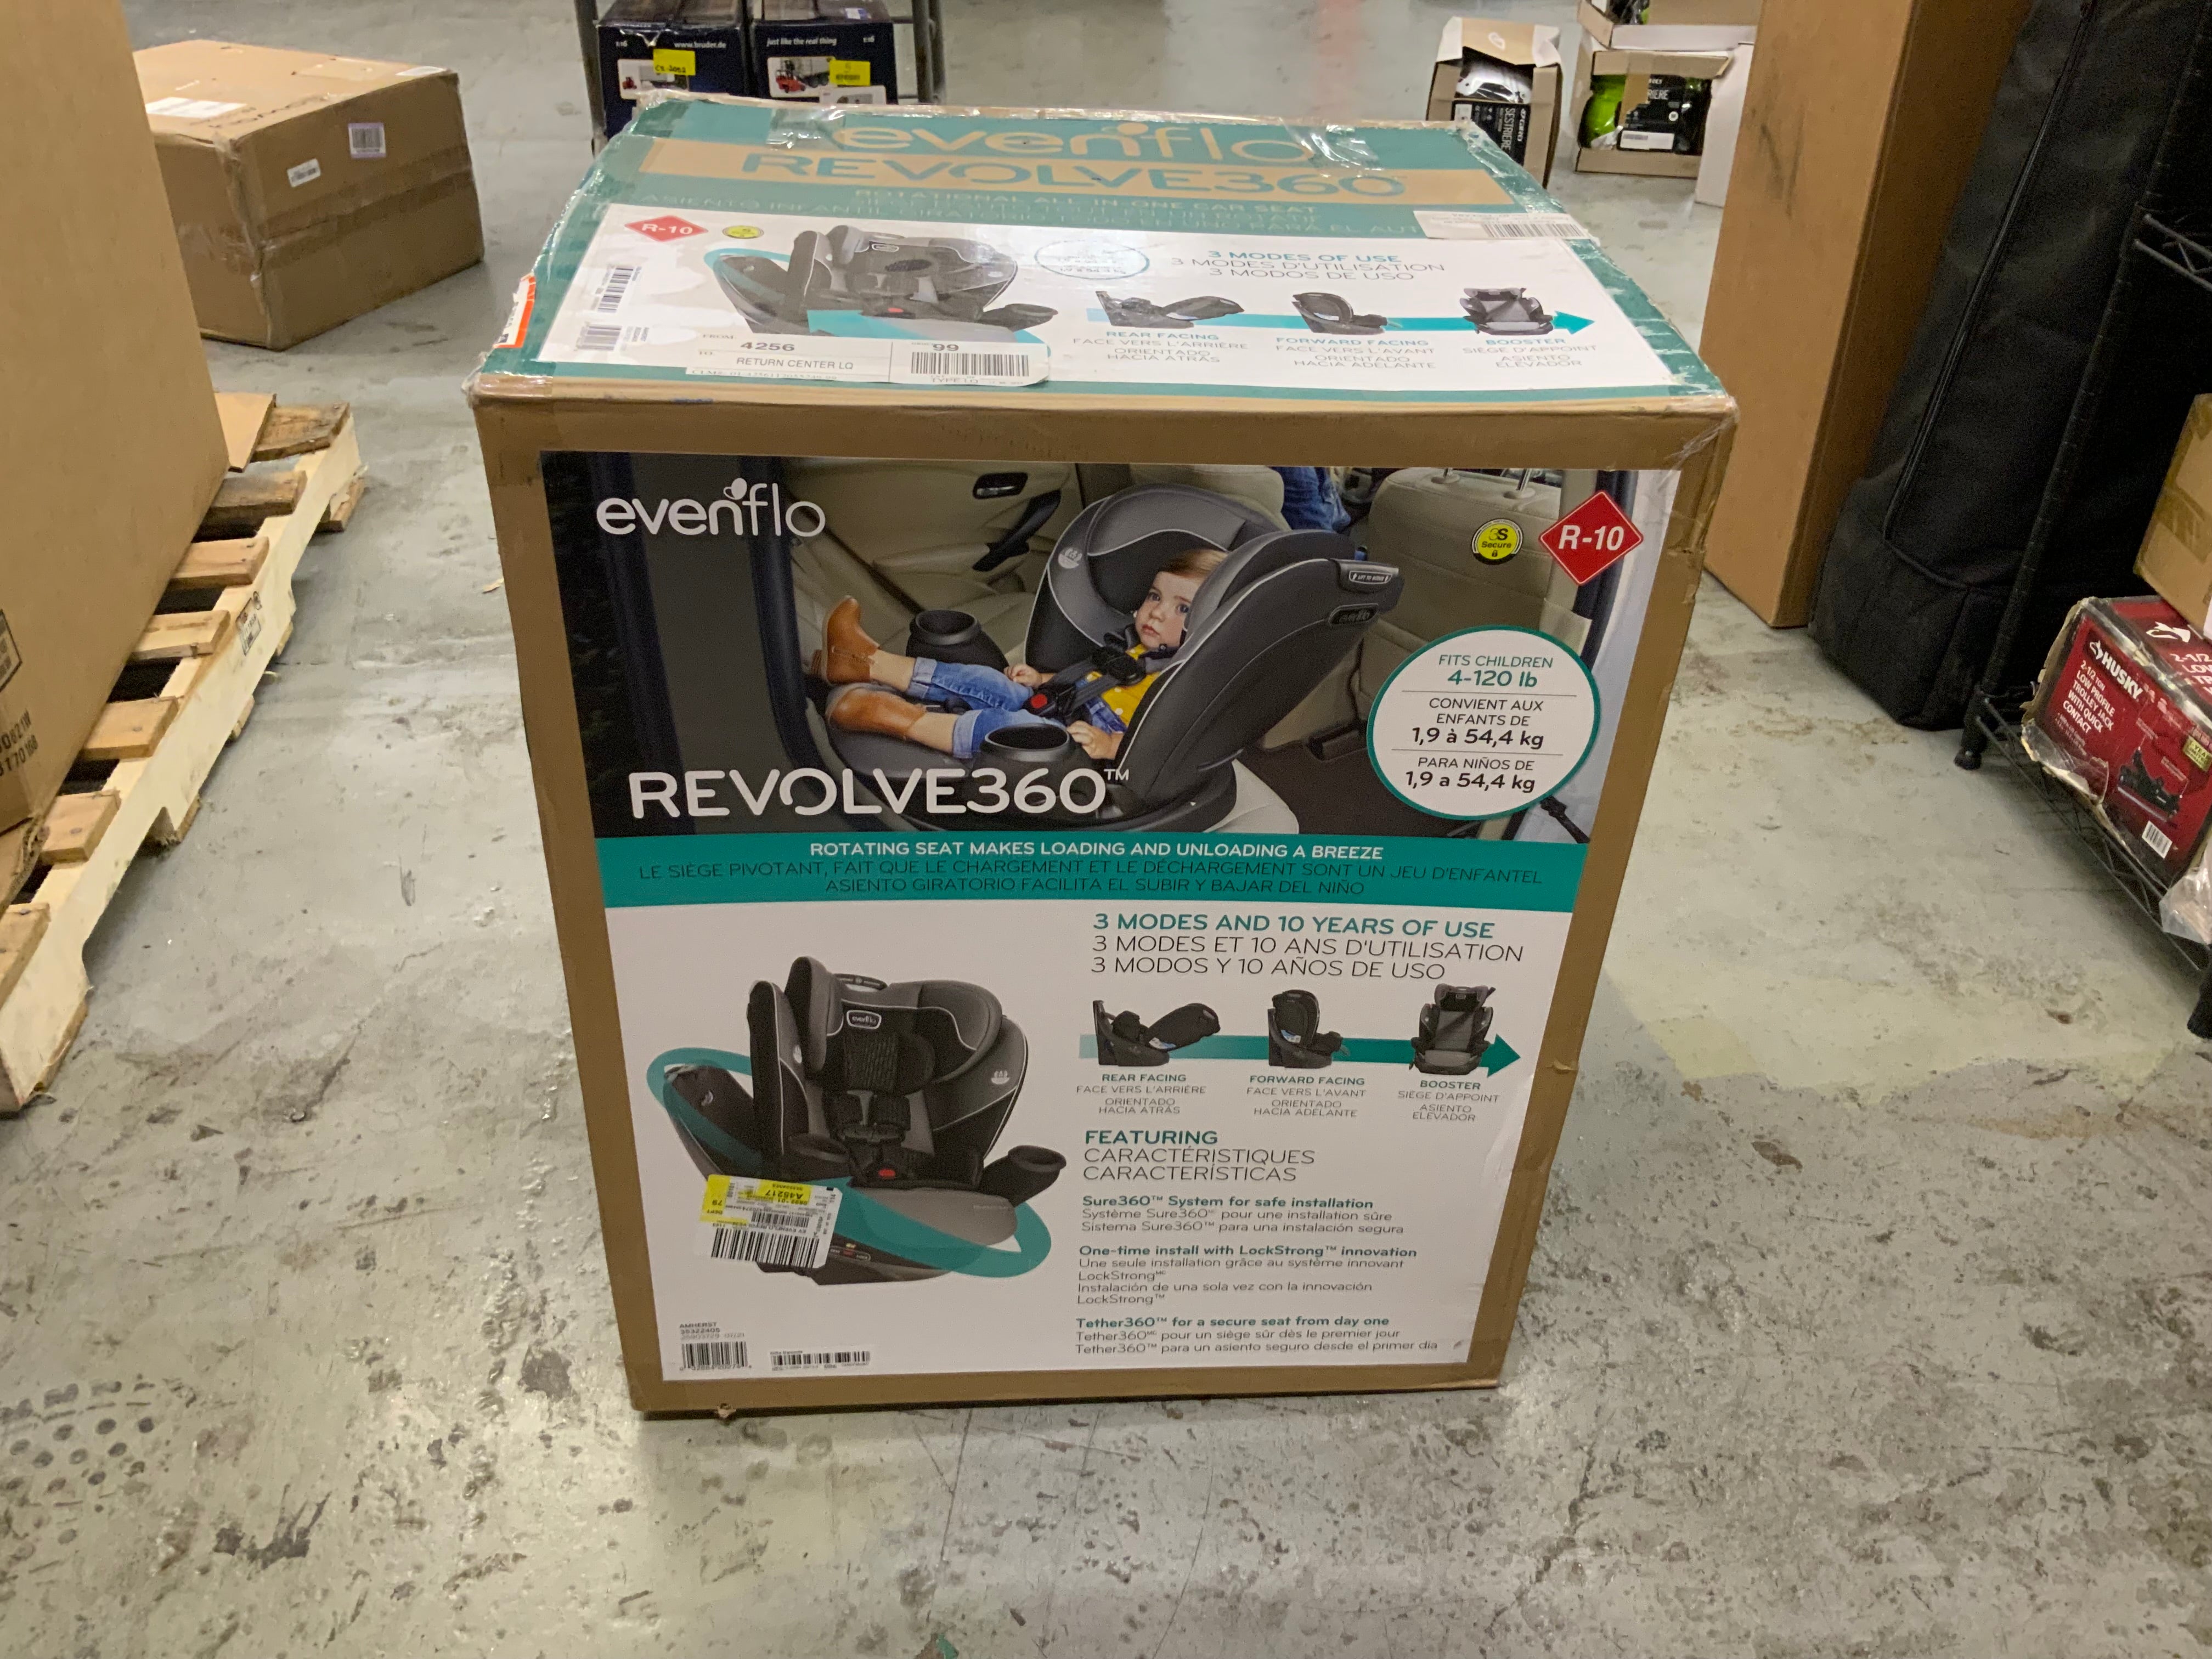 Evenflo Gold Revolve 360 Rotational All-In-One Convertible Car Seat - Amherst (8075819942126)